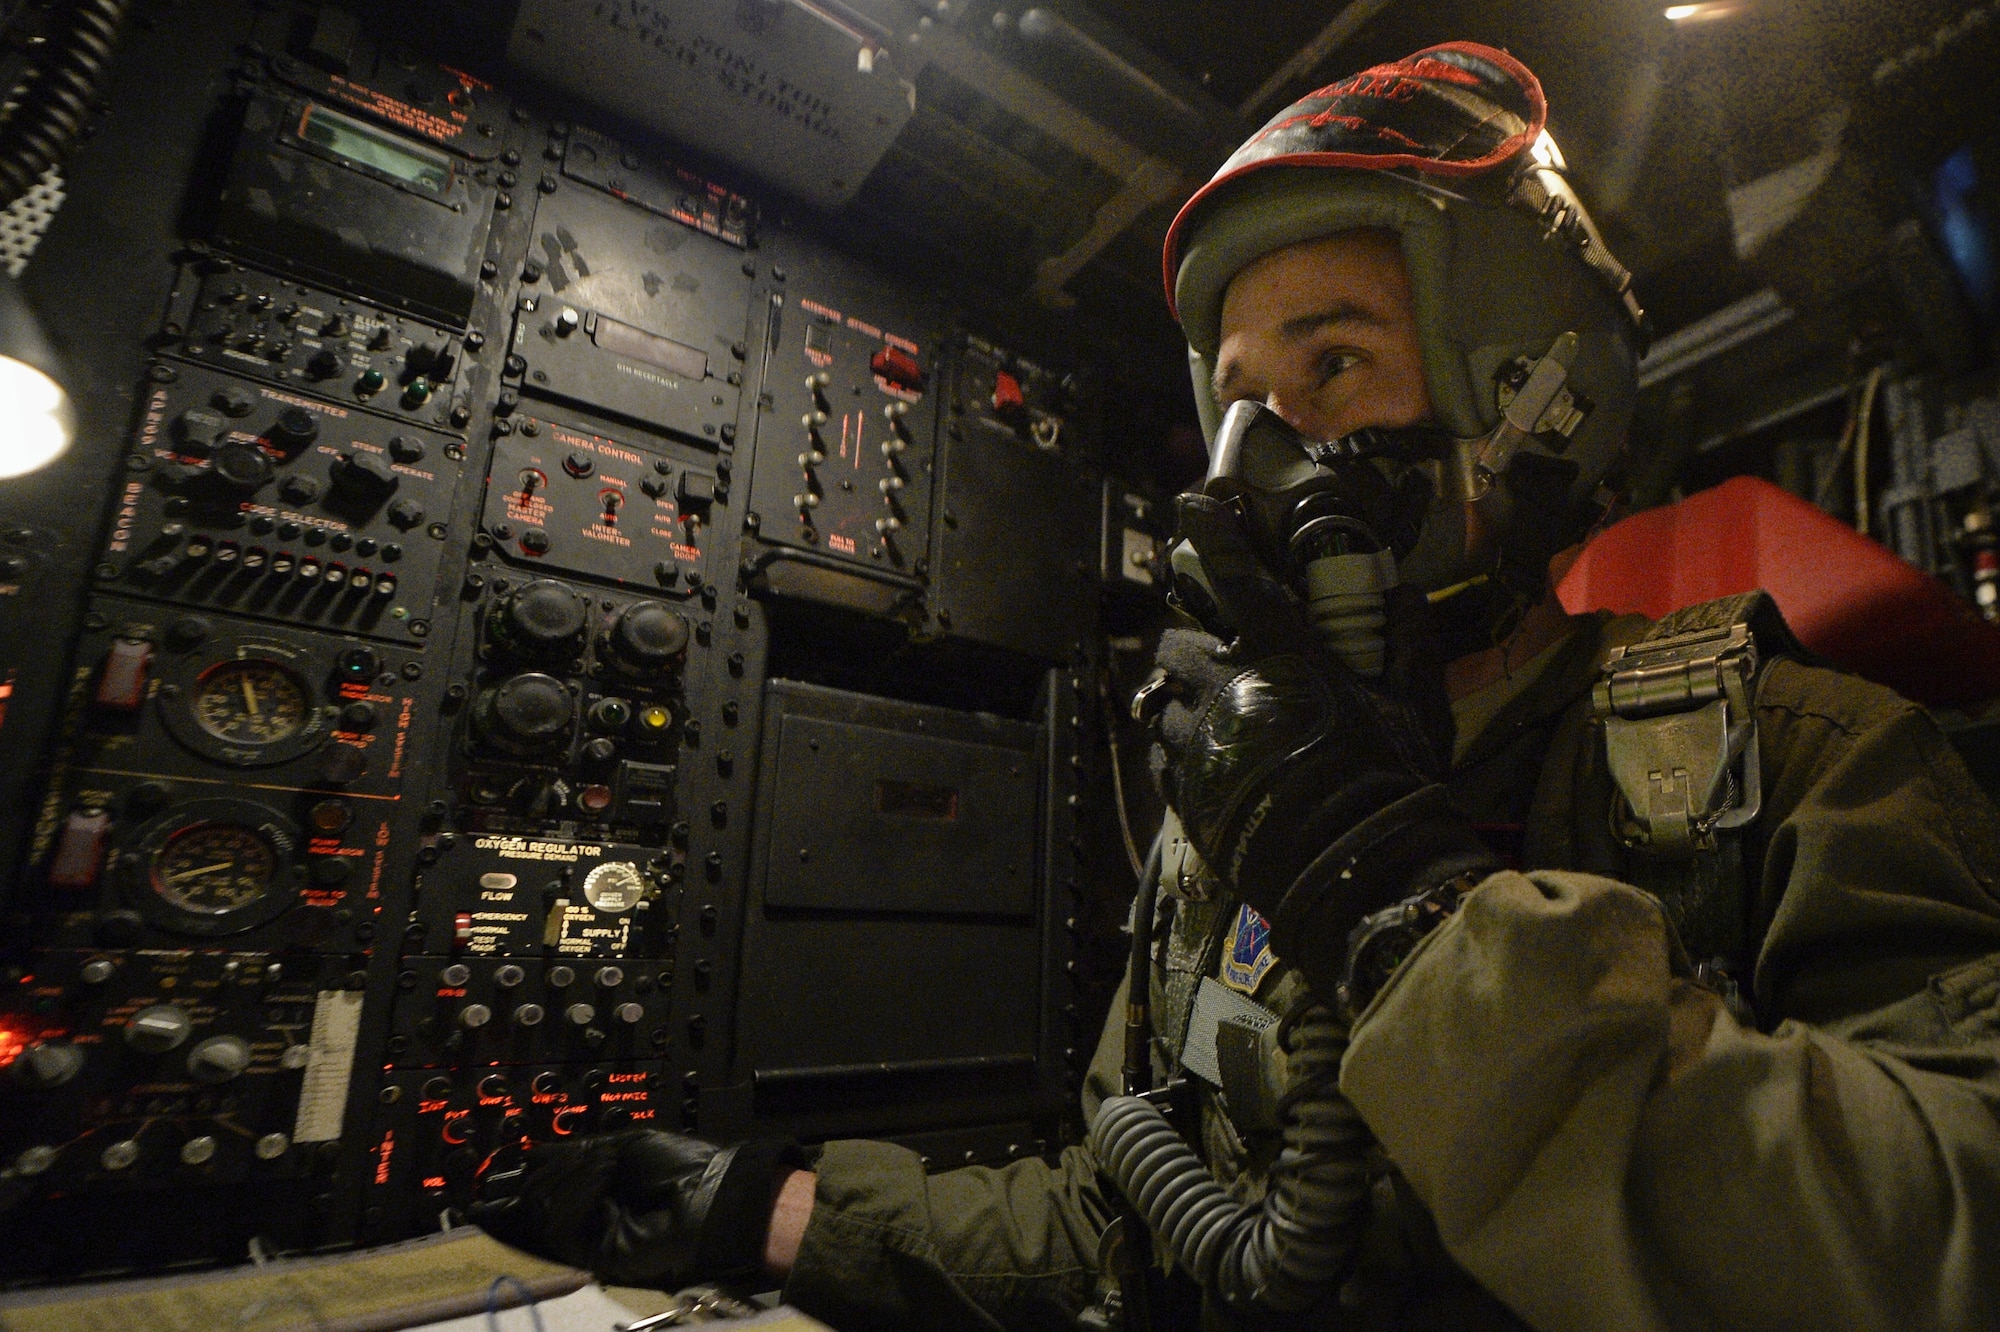 Capt. Greg Lepper, a navigator with the 96th Bomb Squadron, checks instruments in a B-52 Stratofortress while flying over Fort Polk, La., during Green Flag-East 2013. Green Flag-East is designed to train participants for deployment. (U.S. Air Force photo/Staff Sgt. Jonathan Snyder)